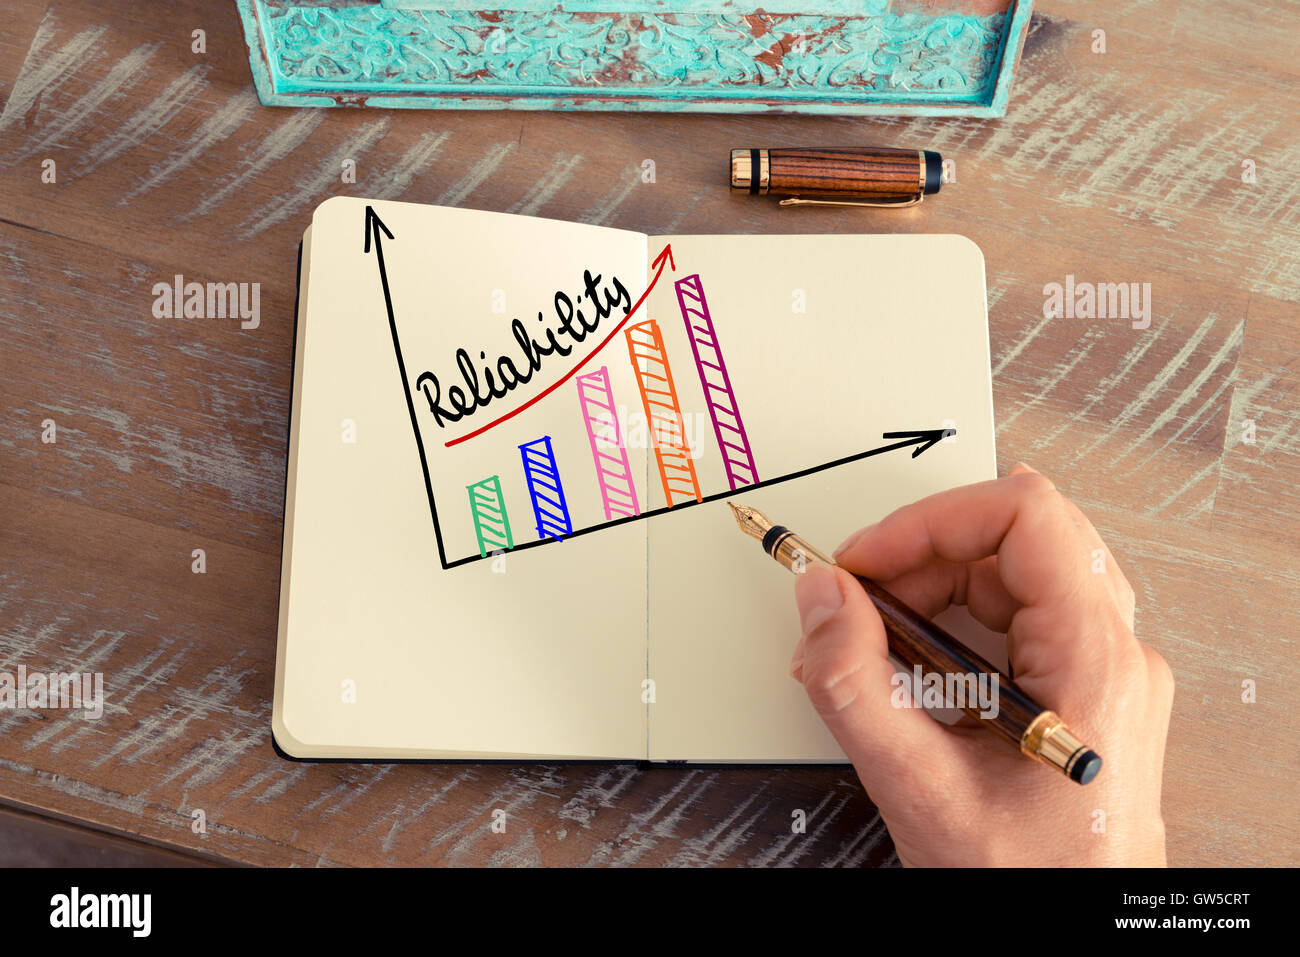 Retro effect and toned image of a woman hand drawing a colourful RELIABILITY graph with fountain pen on a notebook. Stock Photo